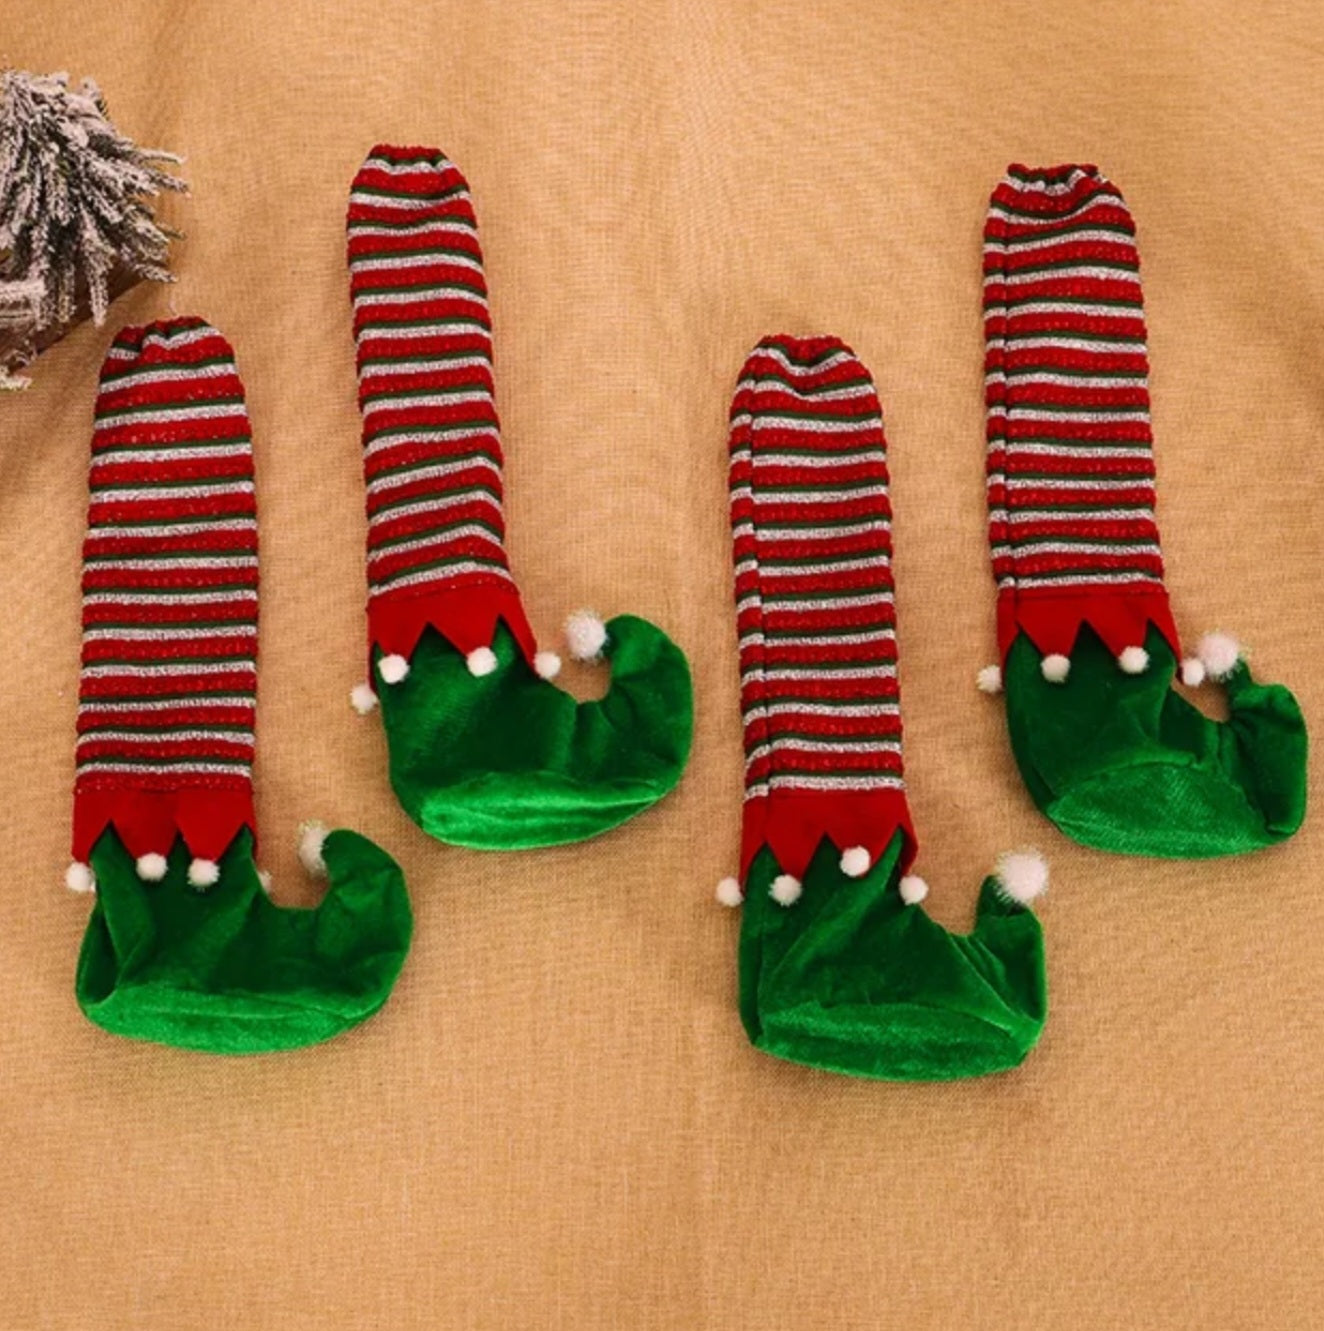 Chair and table leg socks scratch protection Christmas set of 4